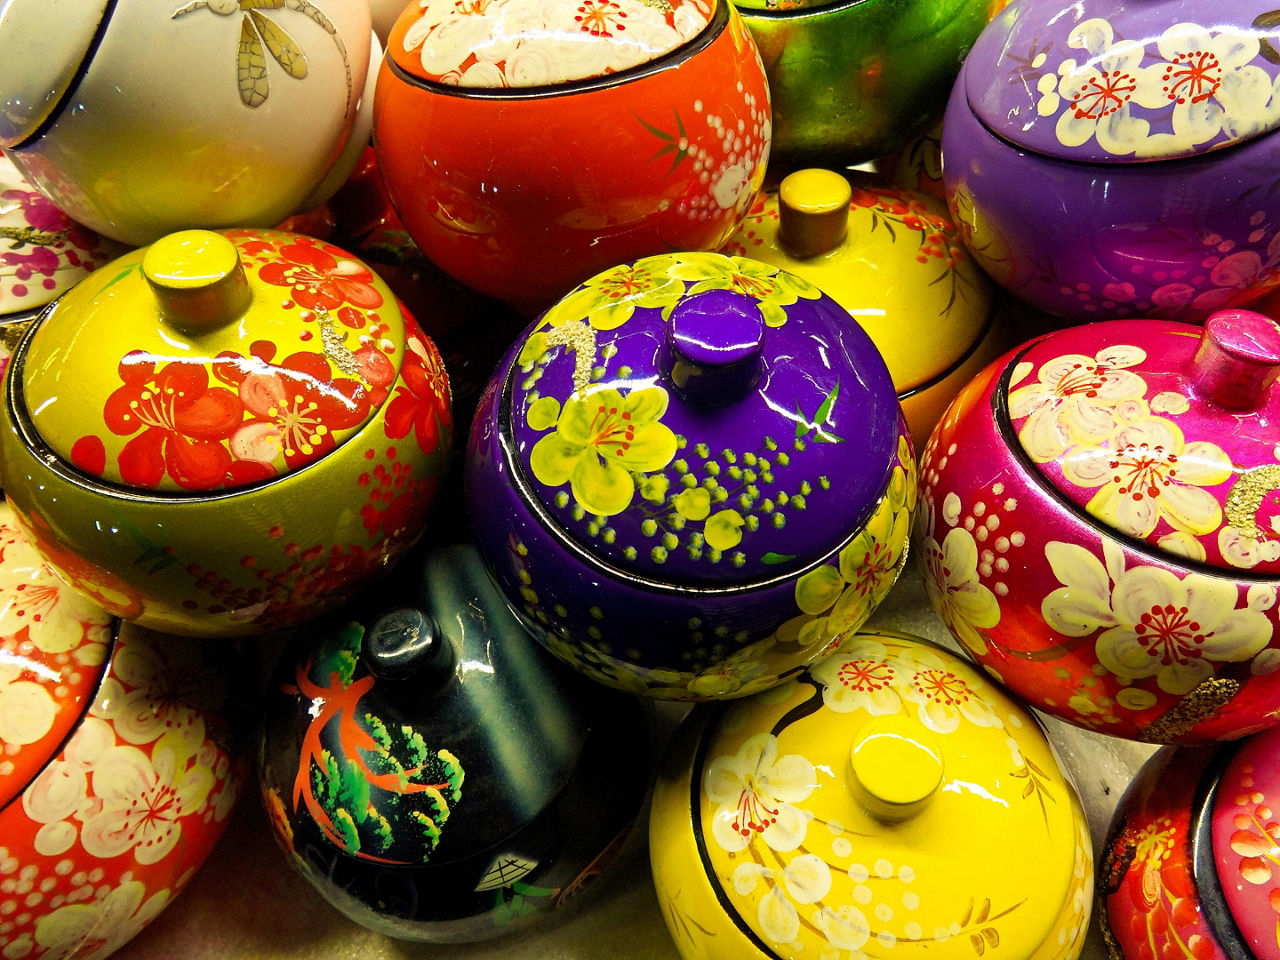 Souvenir lacquer bowls with cover in Vietnam